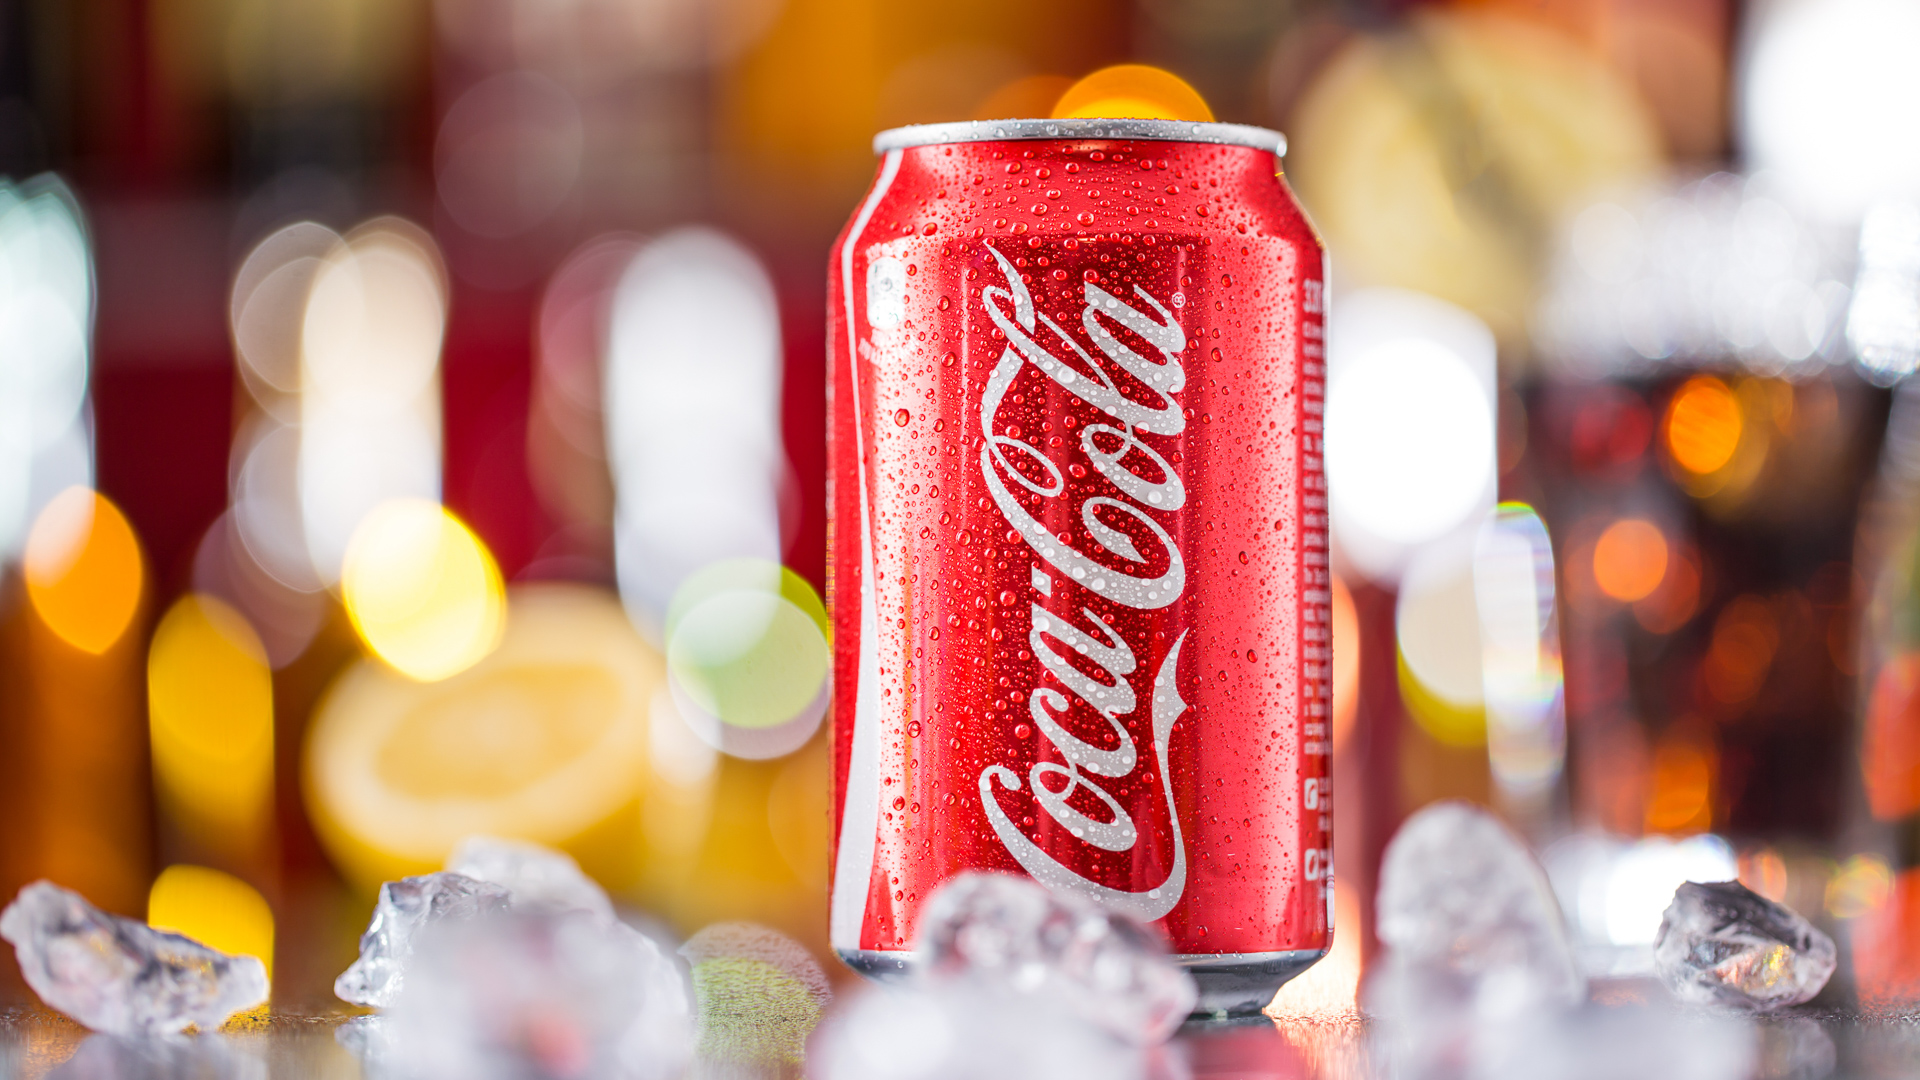 Coca-Cola May Say Revenue, Sales Growth Fell to Two-Year Lows